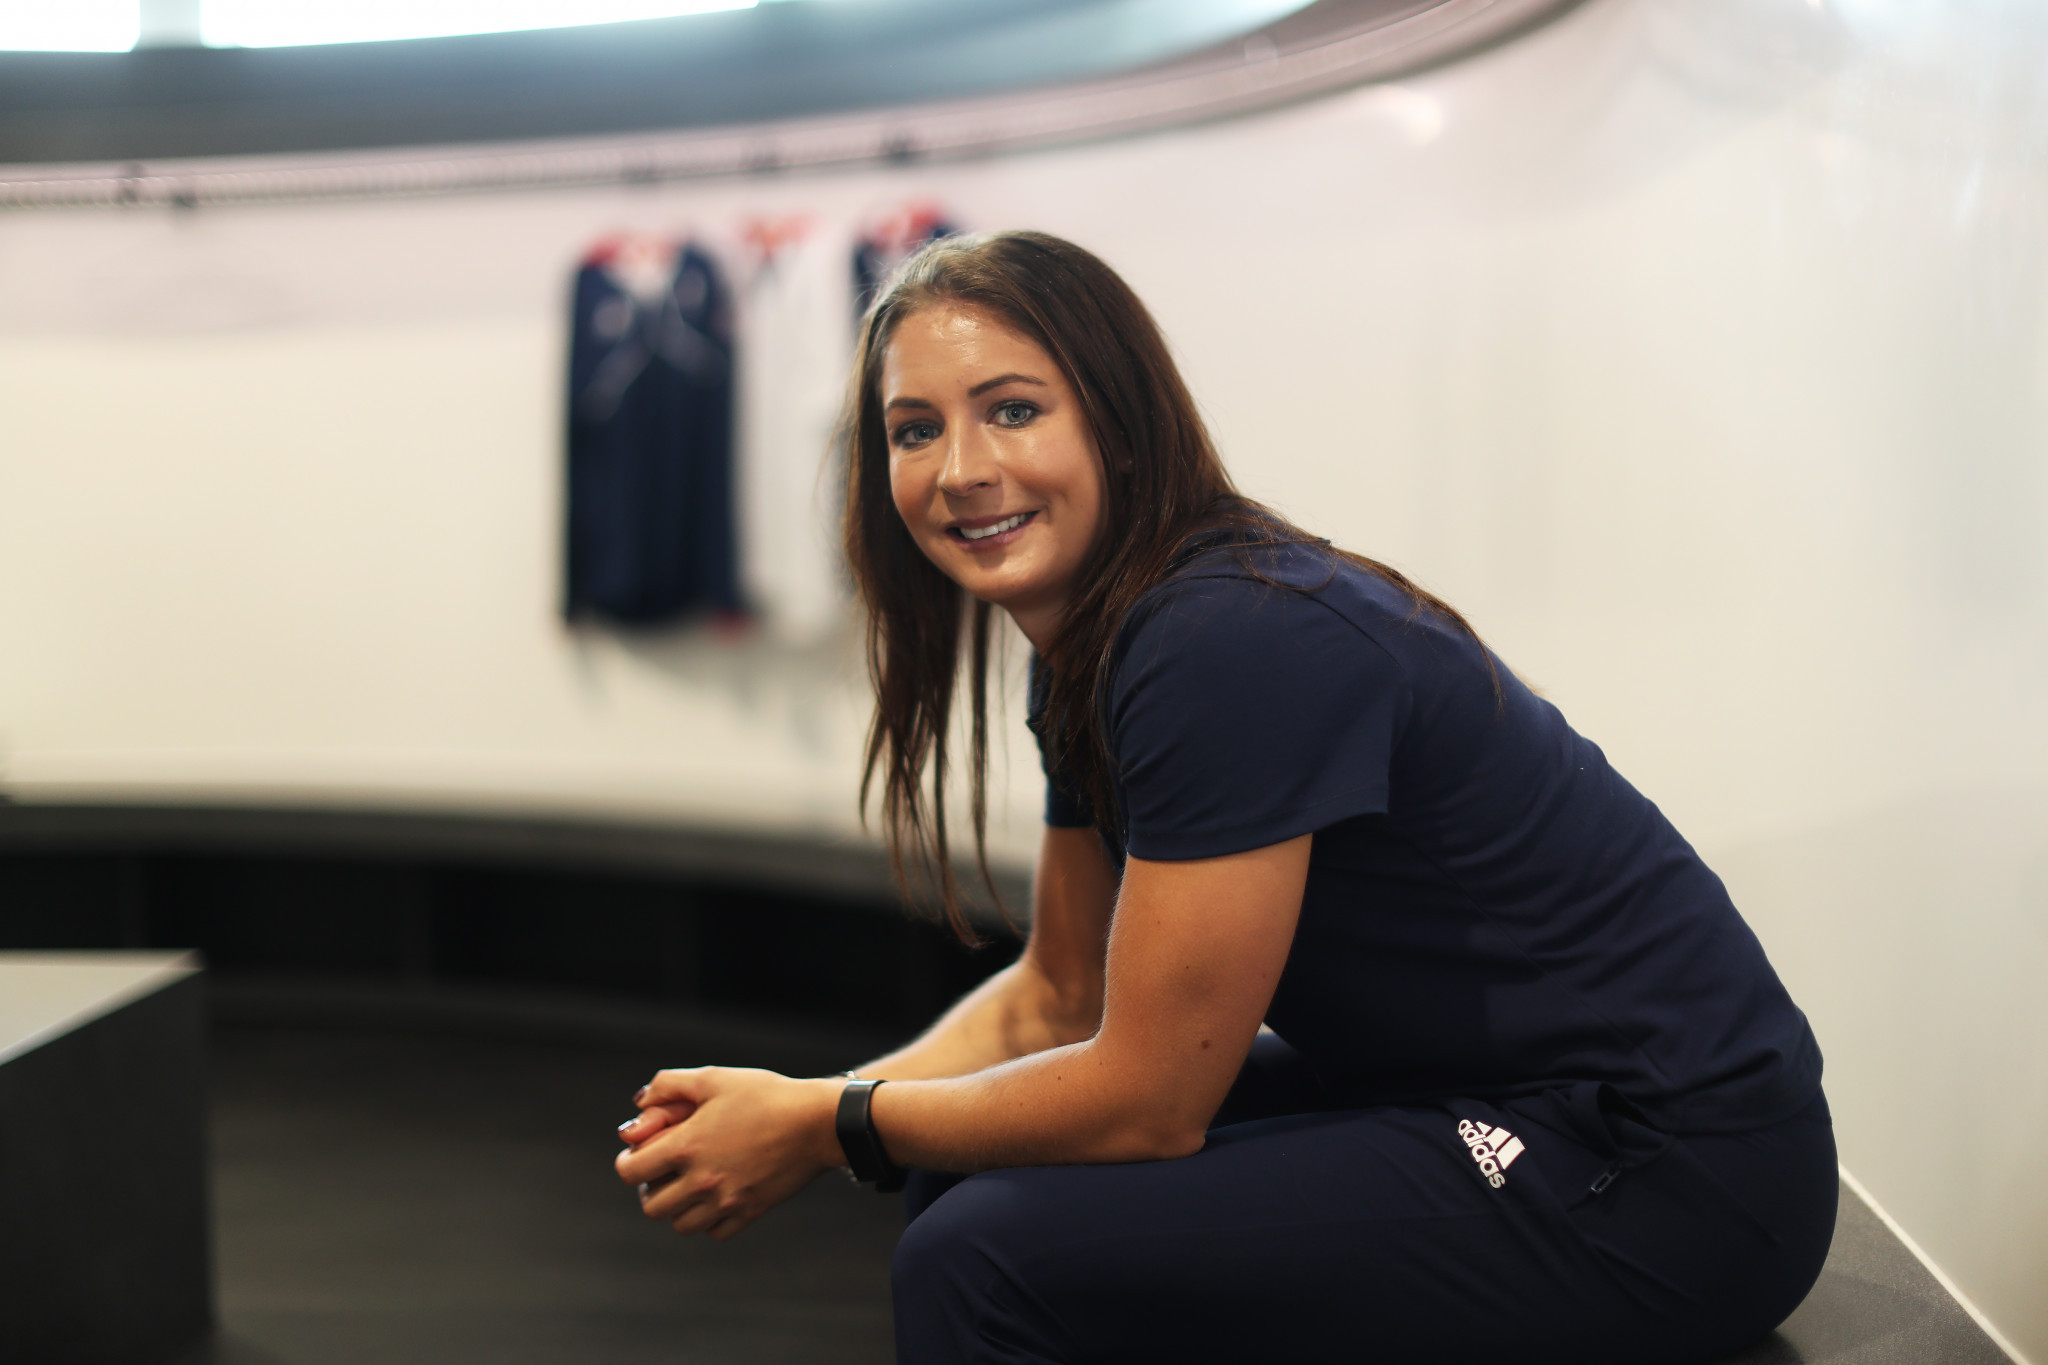 Olympic bronze medallist Muirhead targets improved perception of curling in Britain